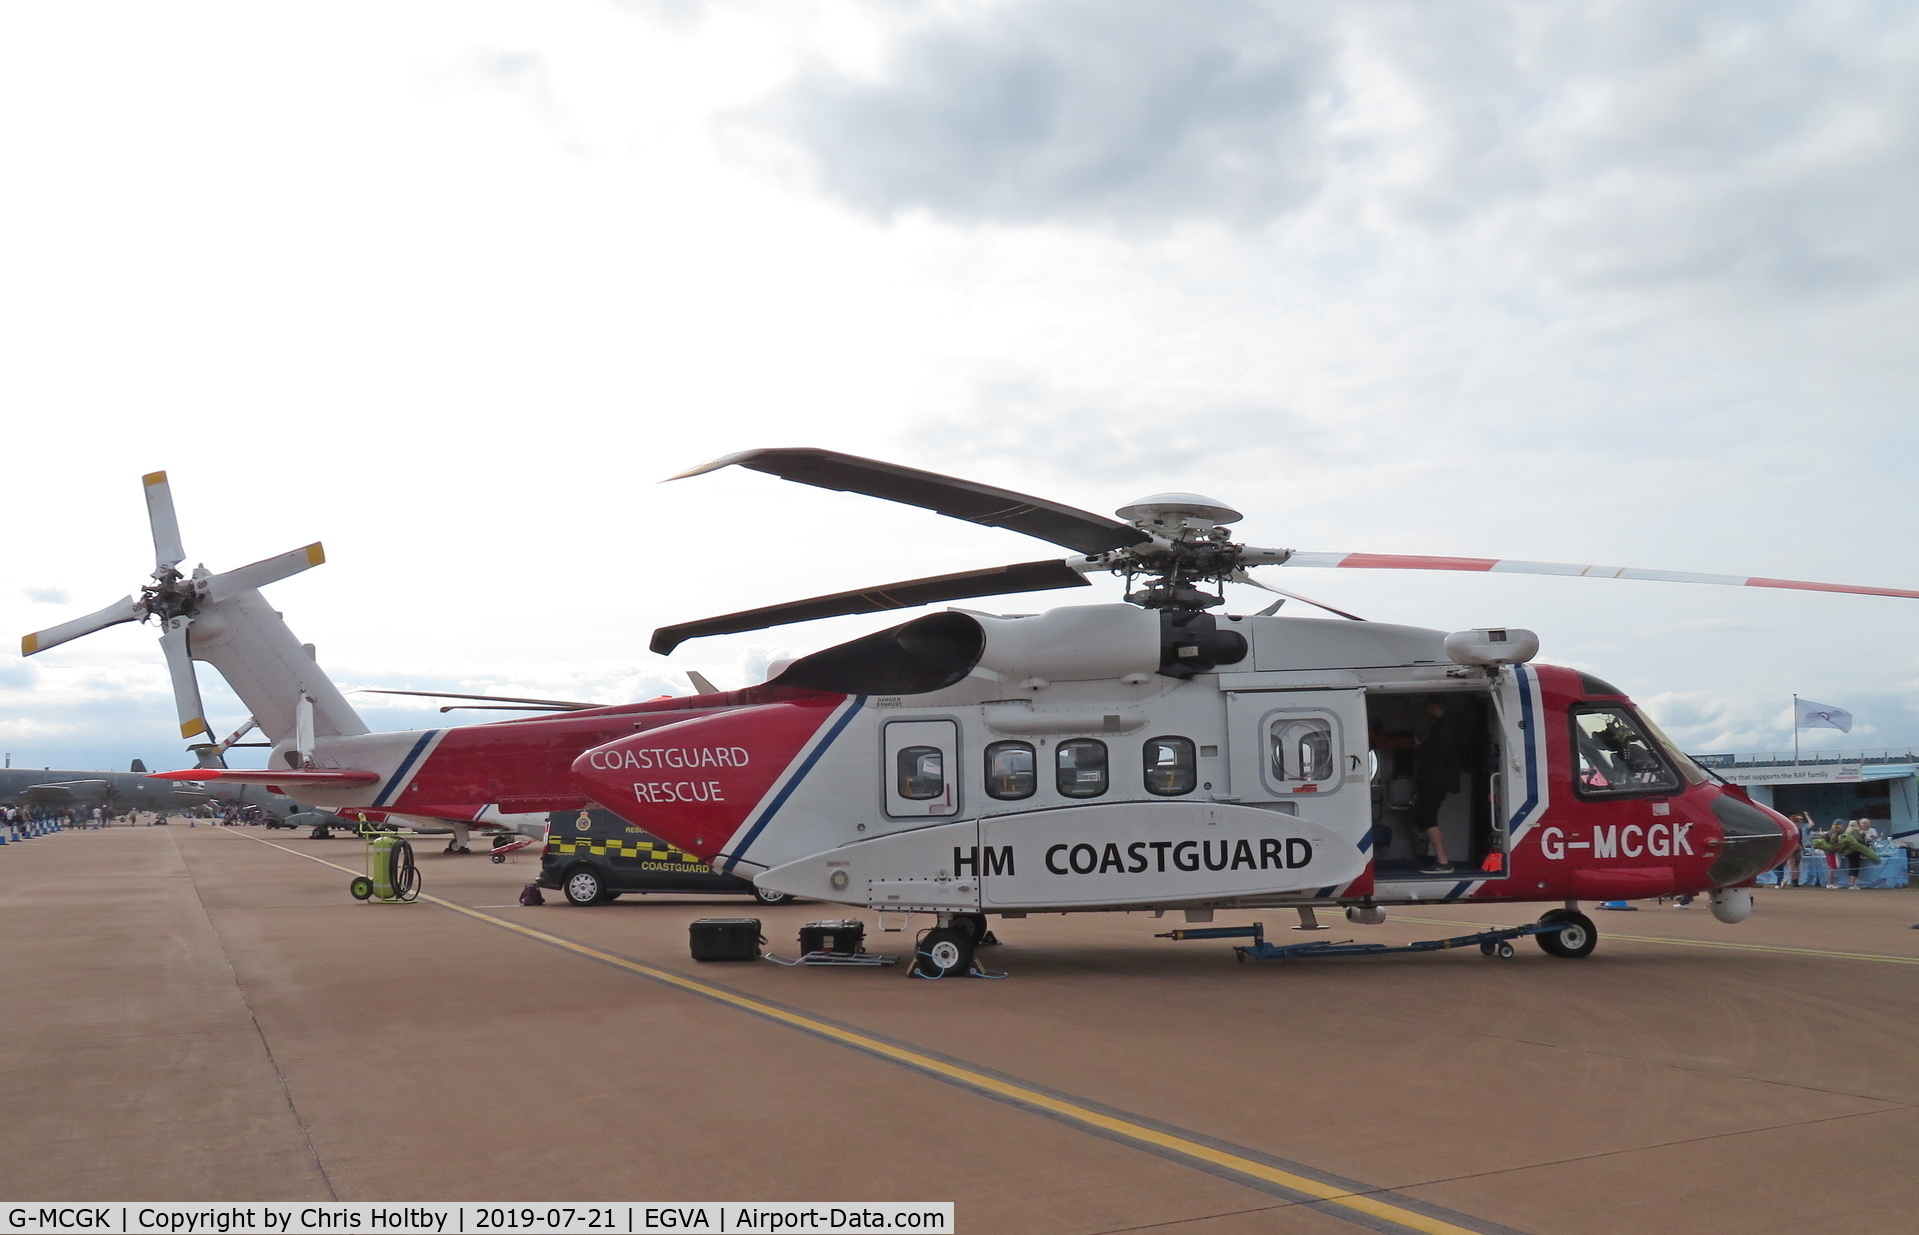 G-MCGK, 2014 Sikorsky S-92A C/N 920251, Parked at RIAT 2019 at RAF Fairford